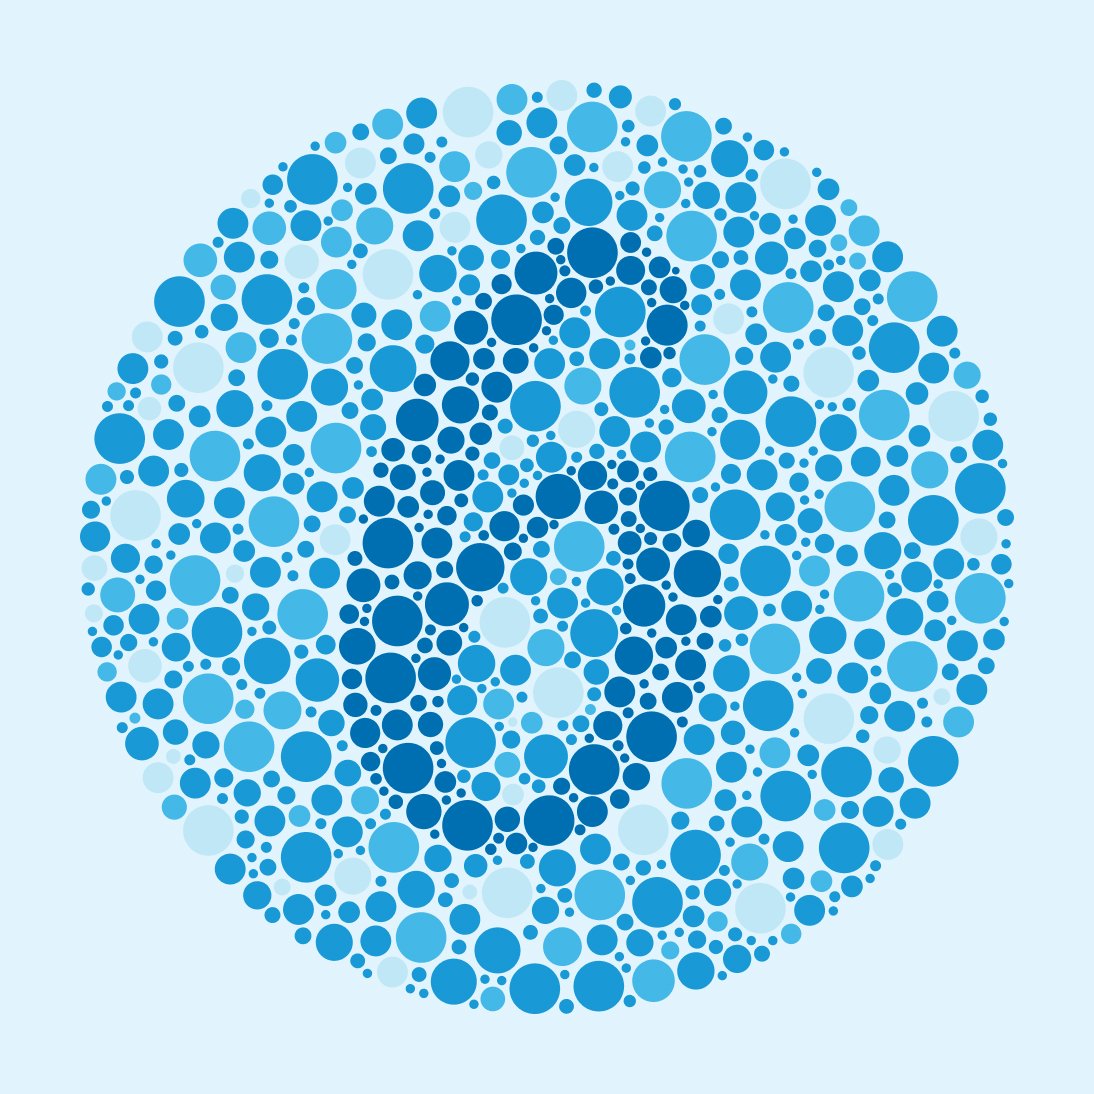 The Best Test for Colour Blindness